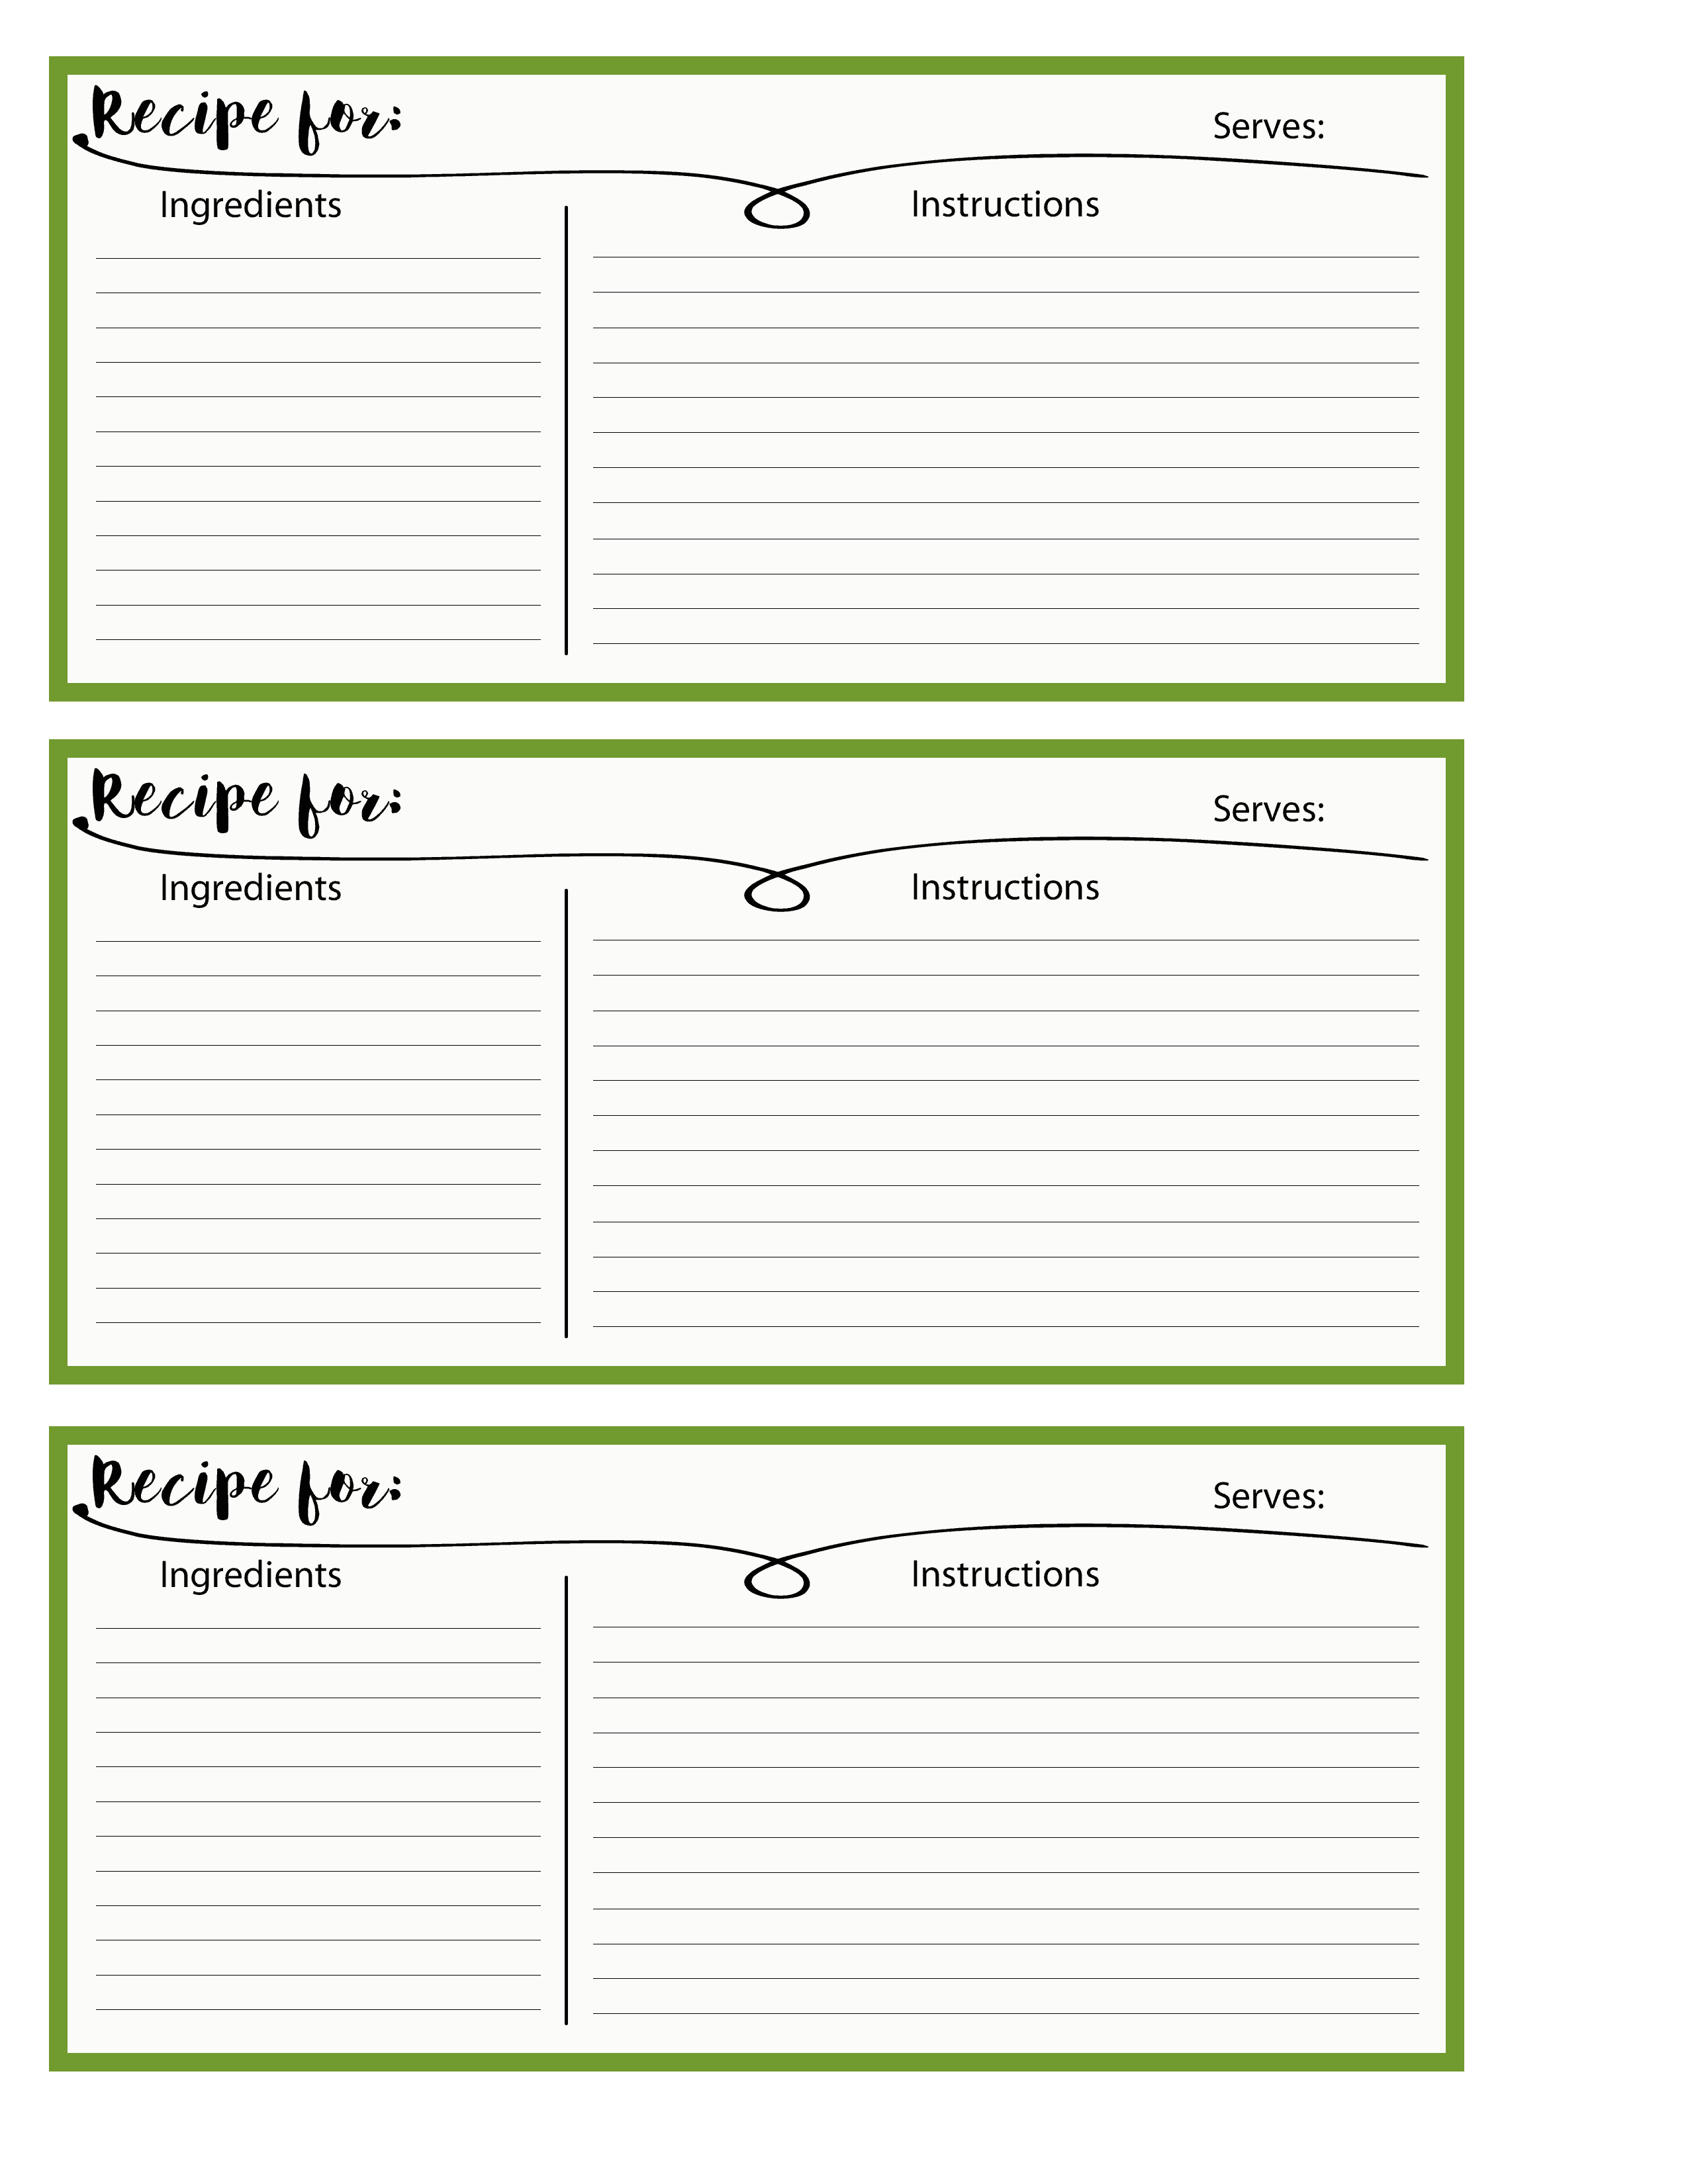 Pantry Recipe Organization - www.michellejdesigns.com - I created this recipe holder and some great free printable recipe cards to house all of my loose recipes. I can't wait to fill it up!